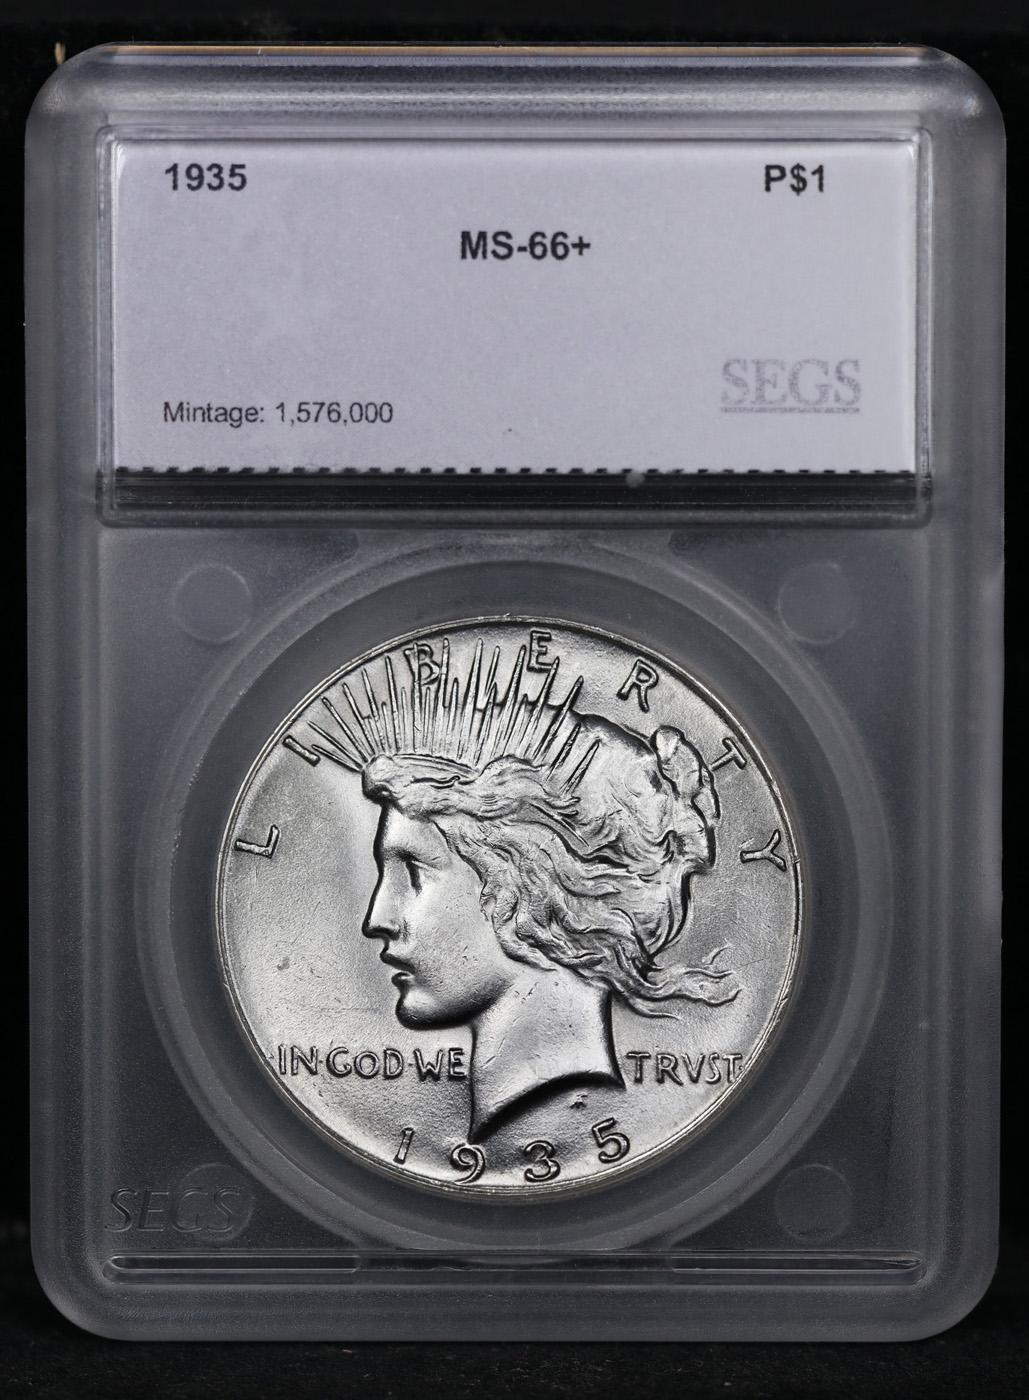 ***Auction Highlight*** 1935-p Peace Dollar Near Top Pop! $1 Graded ms66+ By SEGS (fc)